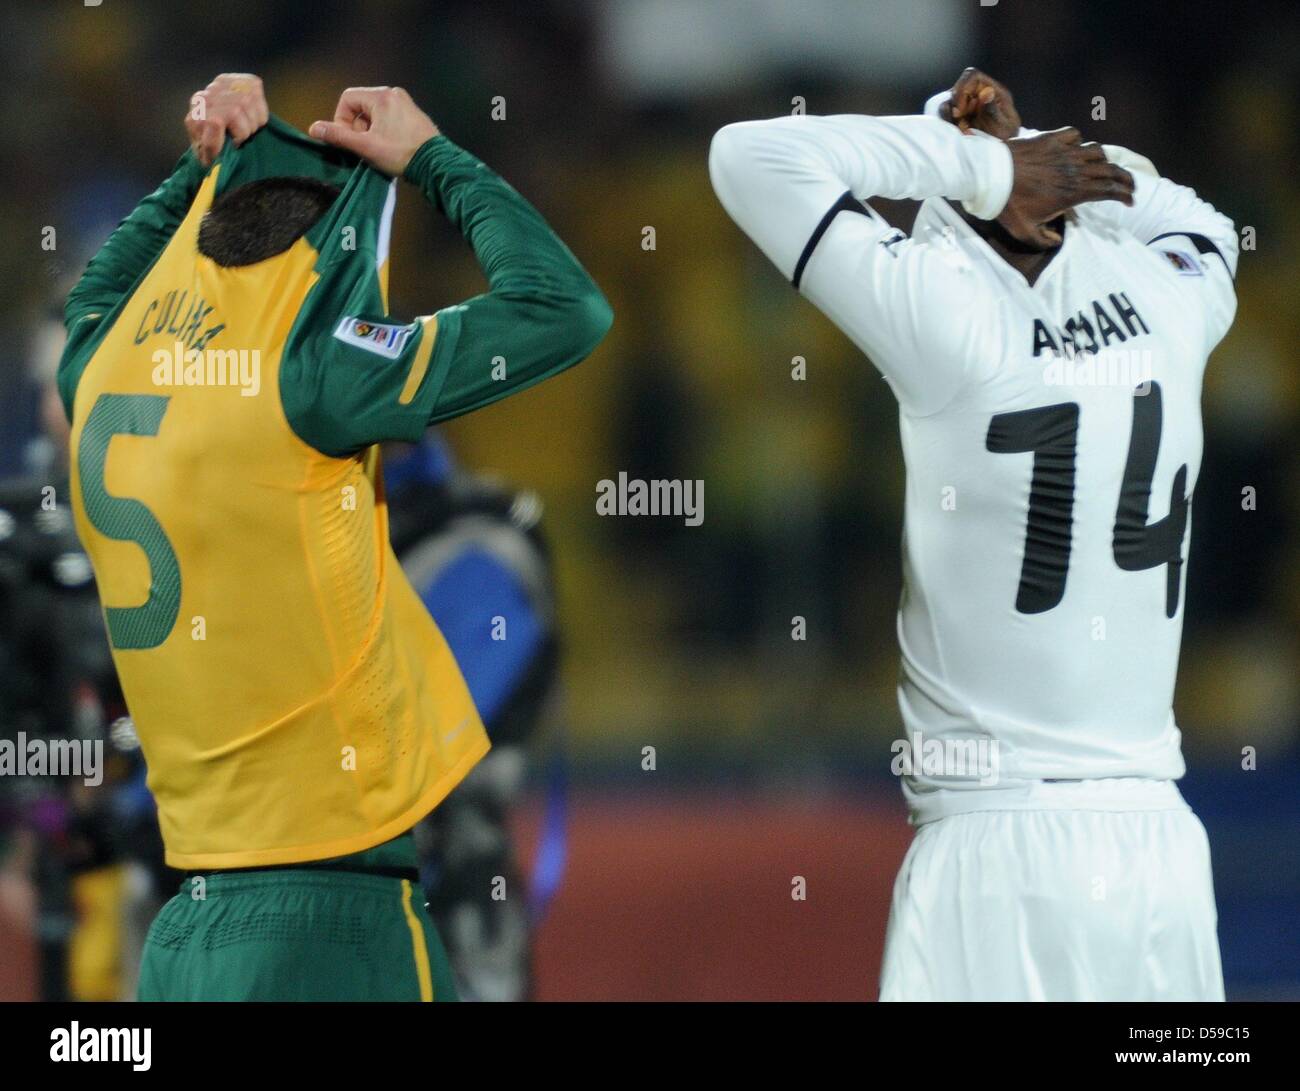 Australia's Jason Culina (L) changes his jersey with Ghana's Matthew Amoah  after the 2010 FIFA World Cup group D match between Ghana and Australia at  the Royal Bafokeng Stadium in Rustenburg, South